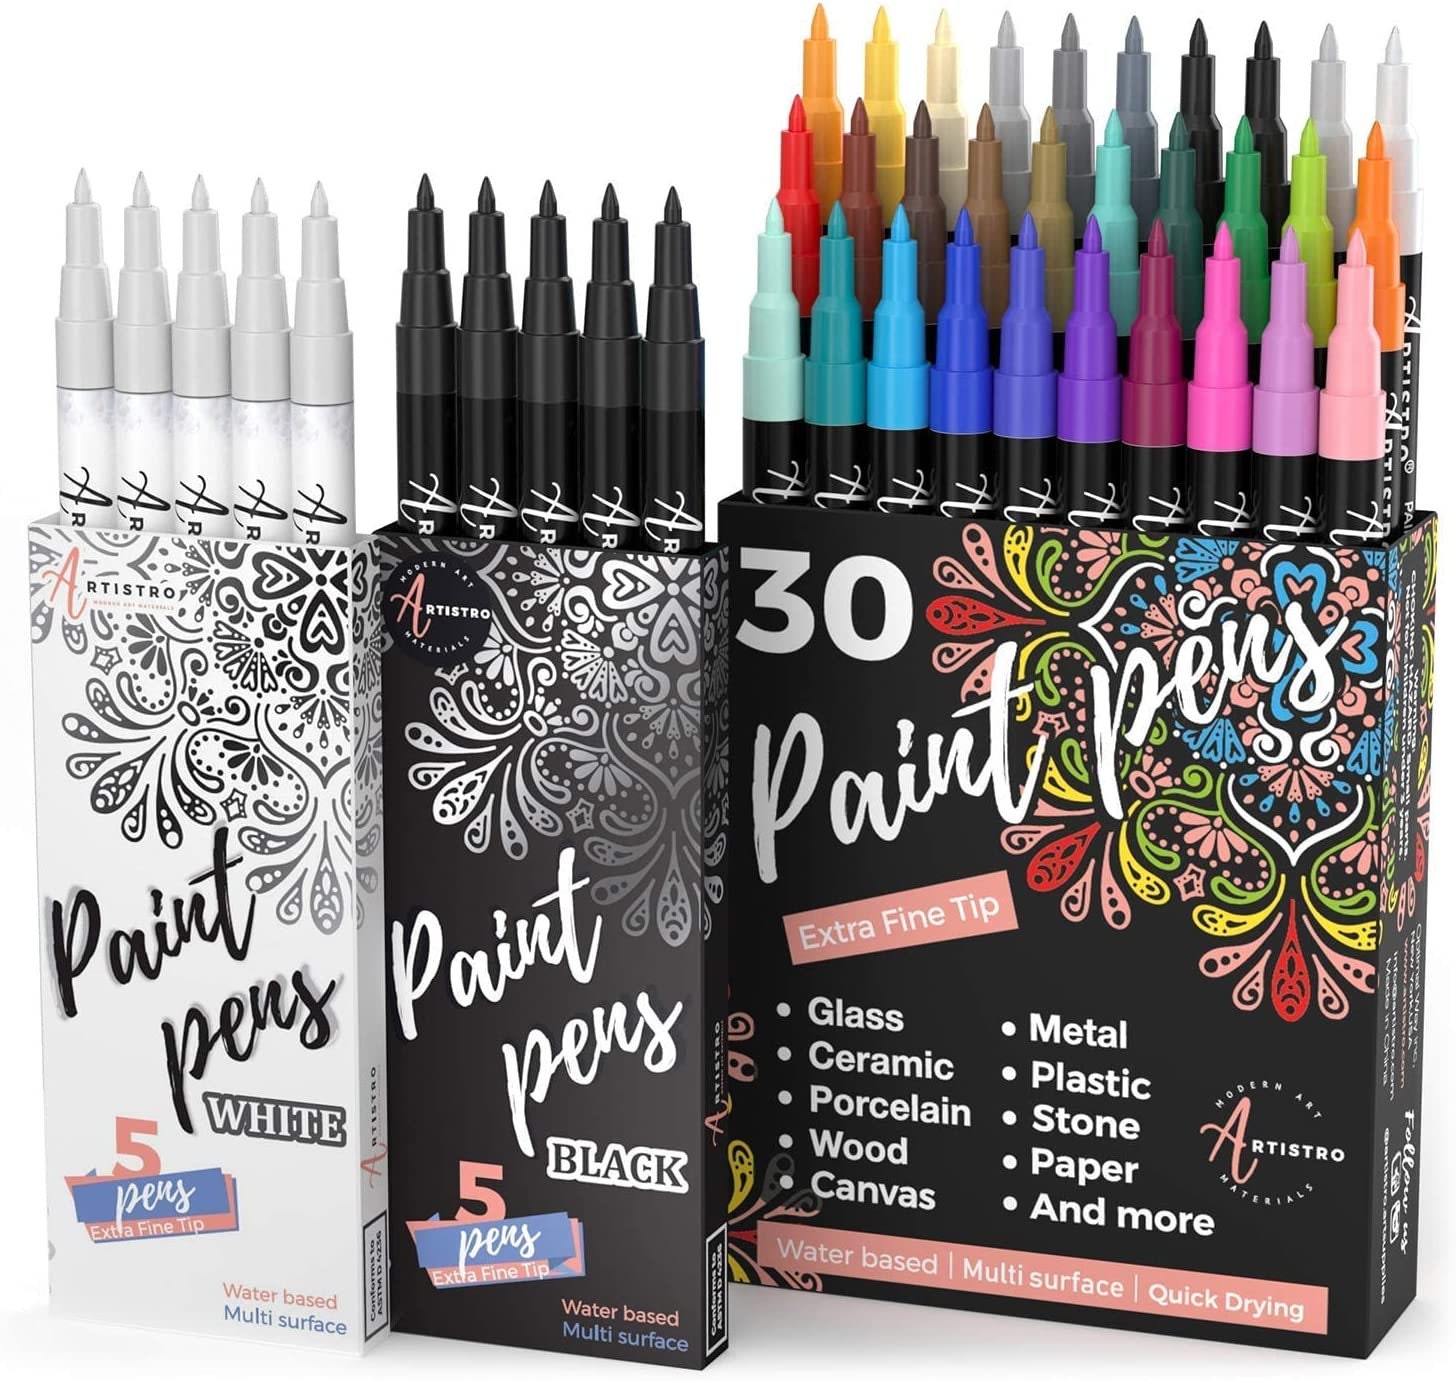  JR.WHITE Paint Markers Pens Acrylic Pen, 24 Colors Acrylic  Paint Pens Medium Tip for Rocks, Stone, Ceramic, Glass, Wood, Canvas  Painting, Paint Marker for Kids Adults Art and Craft Making Supplies 